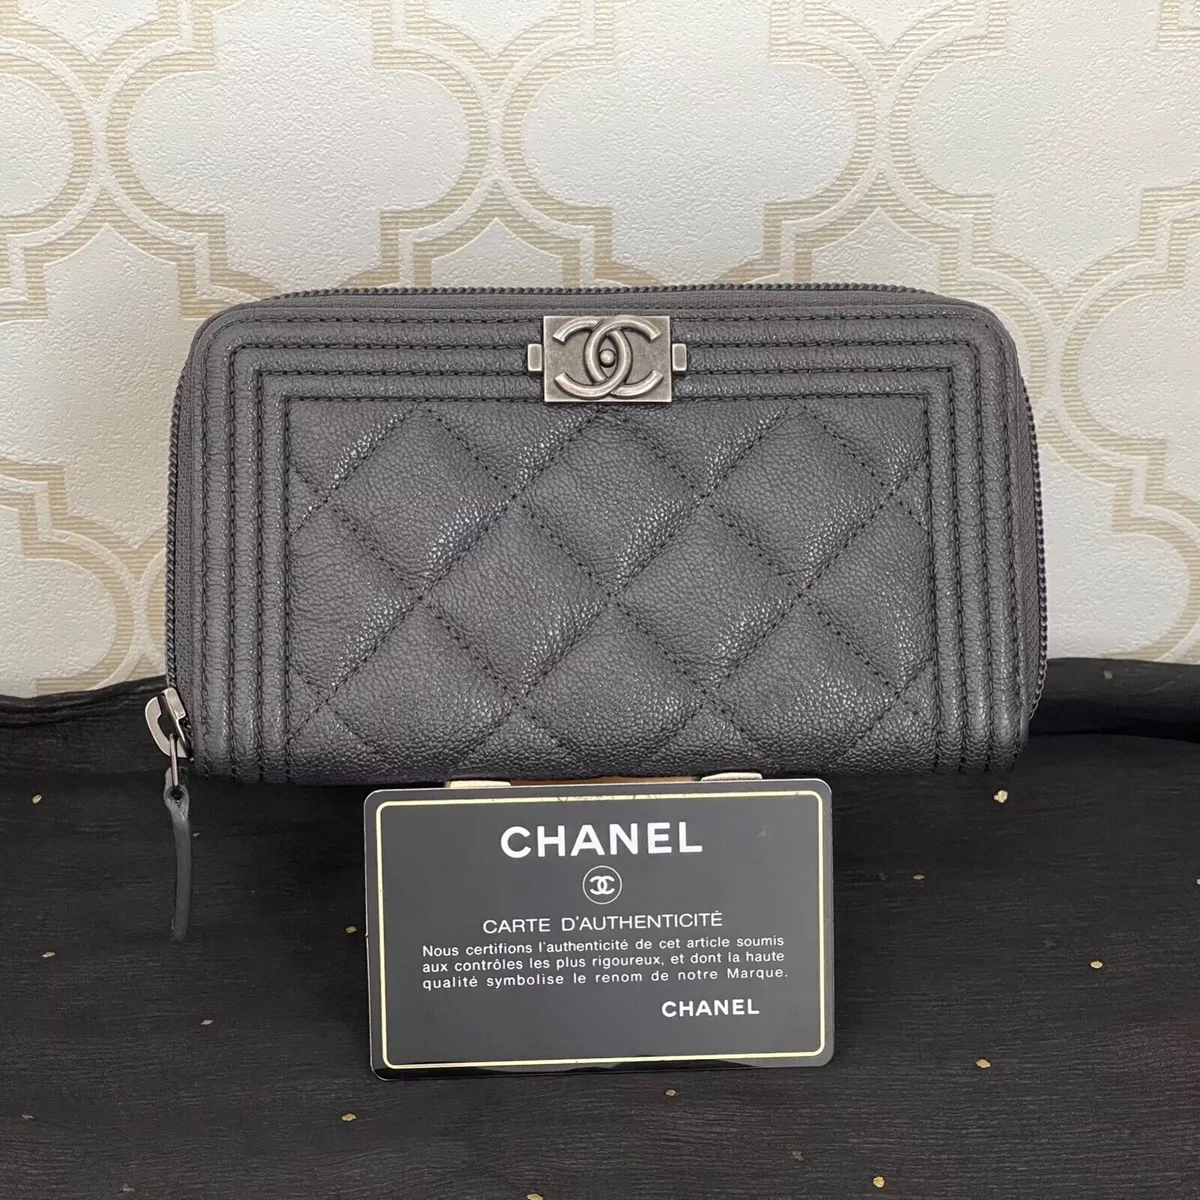 CHANEL Caviar Quilted CC Zip Card Holder Black 260625